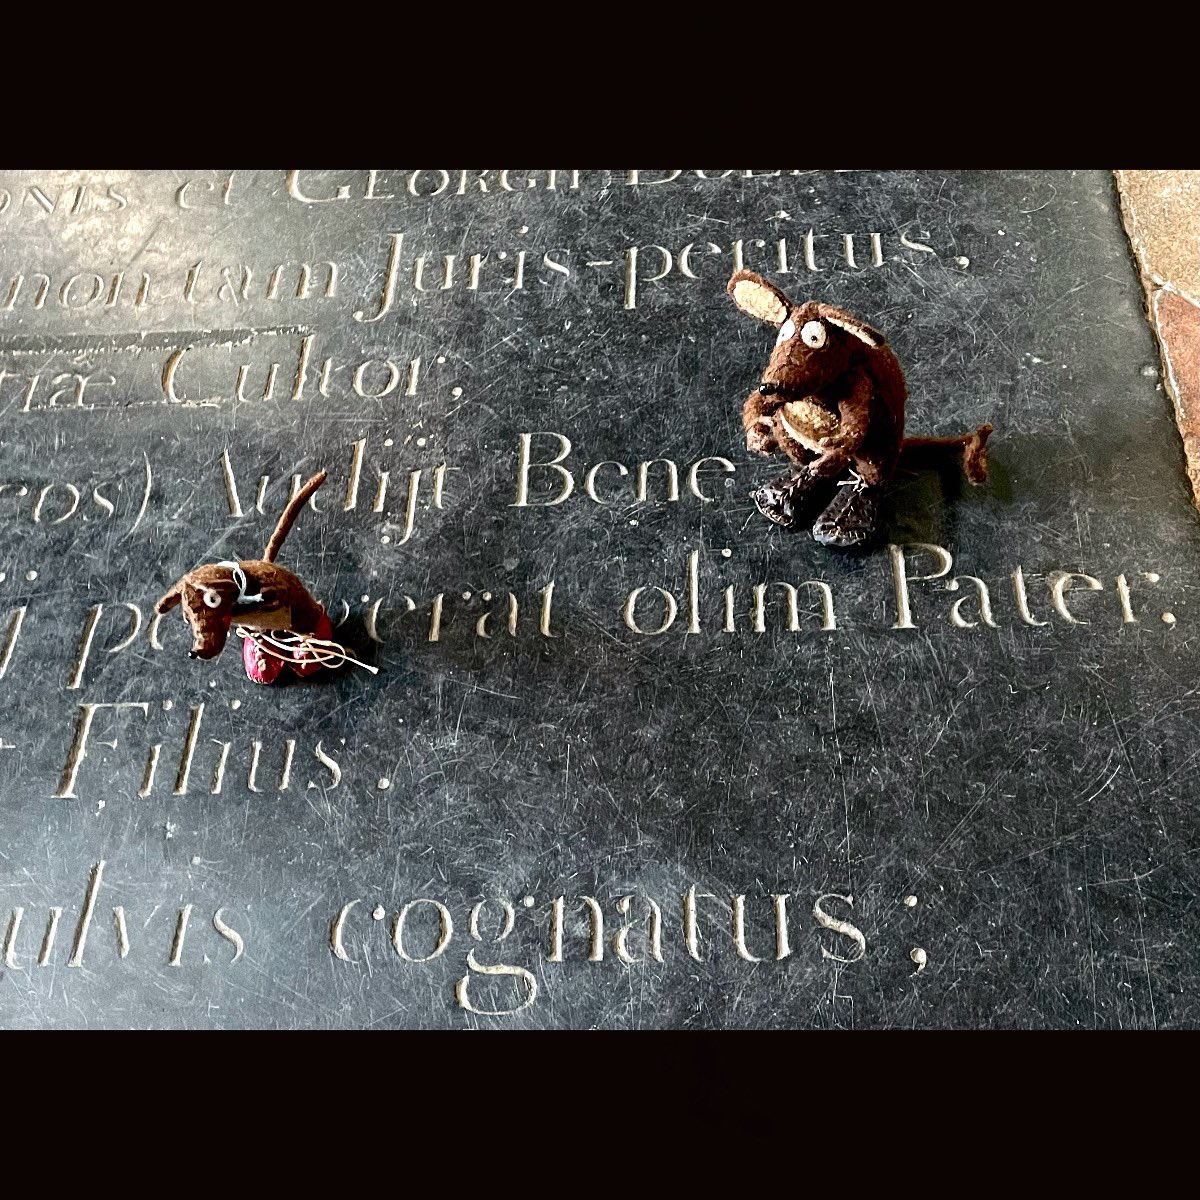 fabula murina (mouse story) CXIX Minimus Silvium docet verba in pavimento ecclesiae legere (Minimus is teaching Silvius to read words on the church floor). mures verba FILIUS et PATER inveniunt, sed nec MUS nec CASEUS (The mice find SON and FATHER, but not MOUSE or CHEESE)!